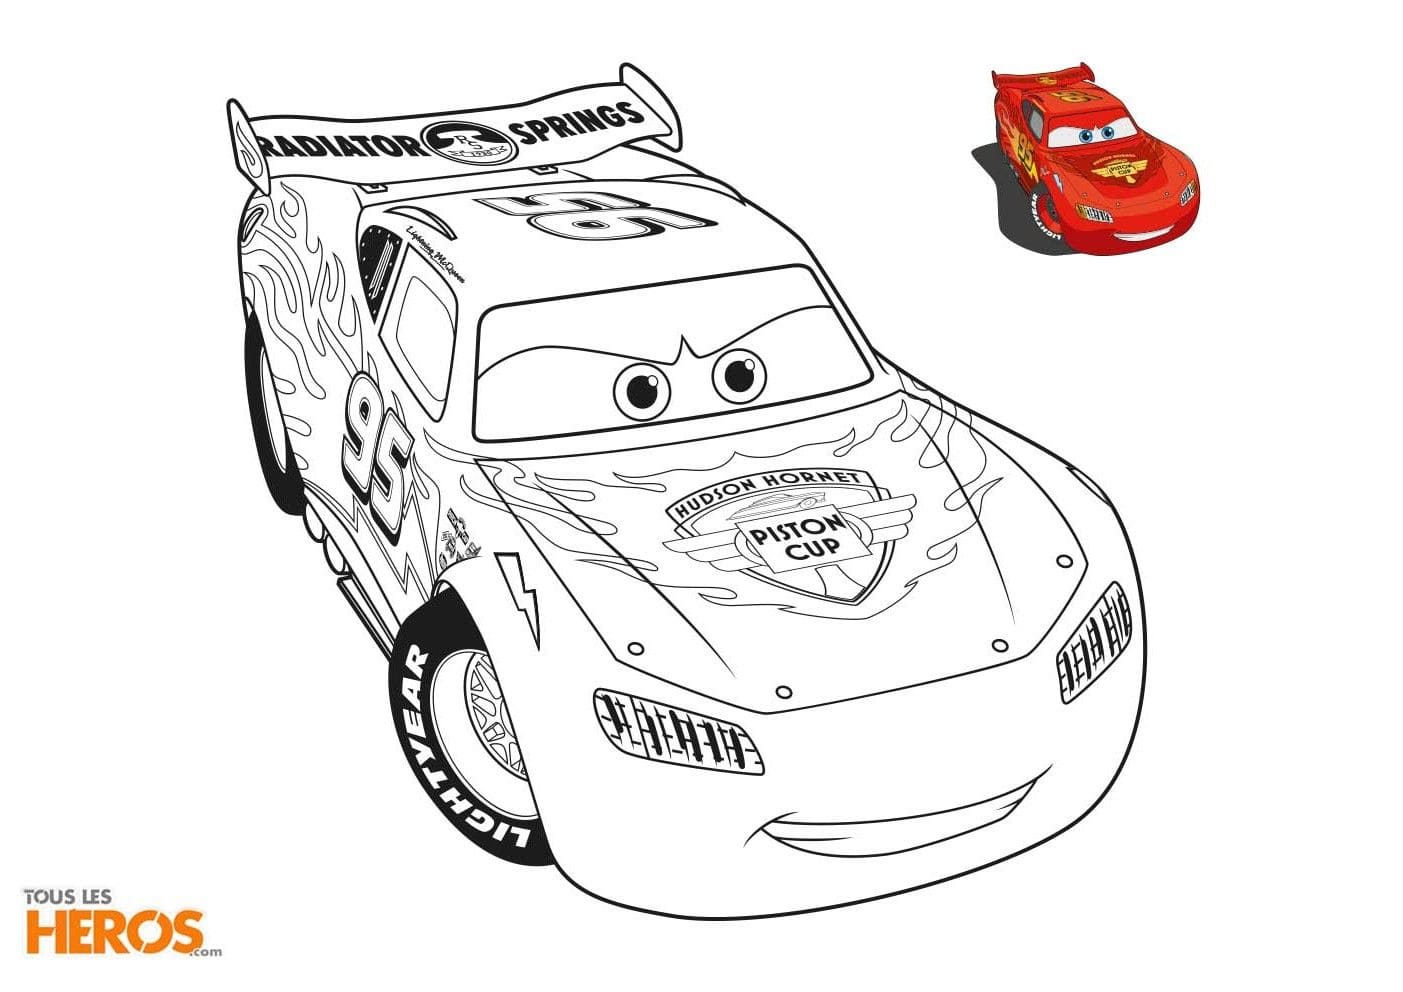 Lightning McQueen with color image.